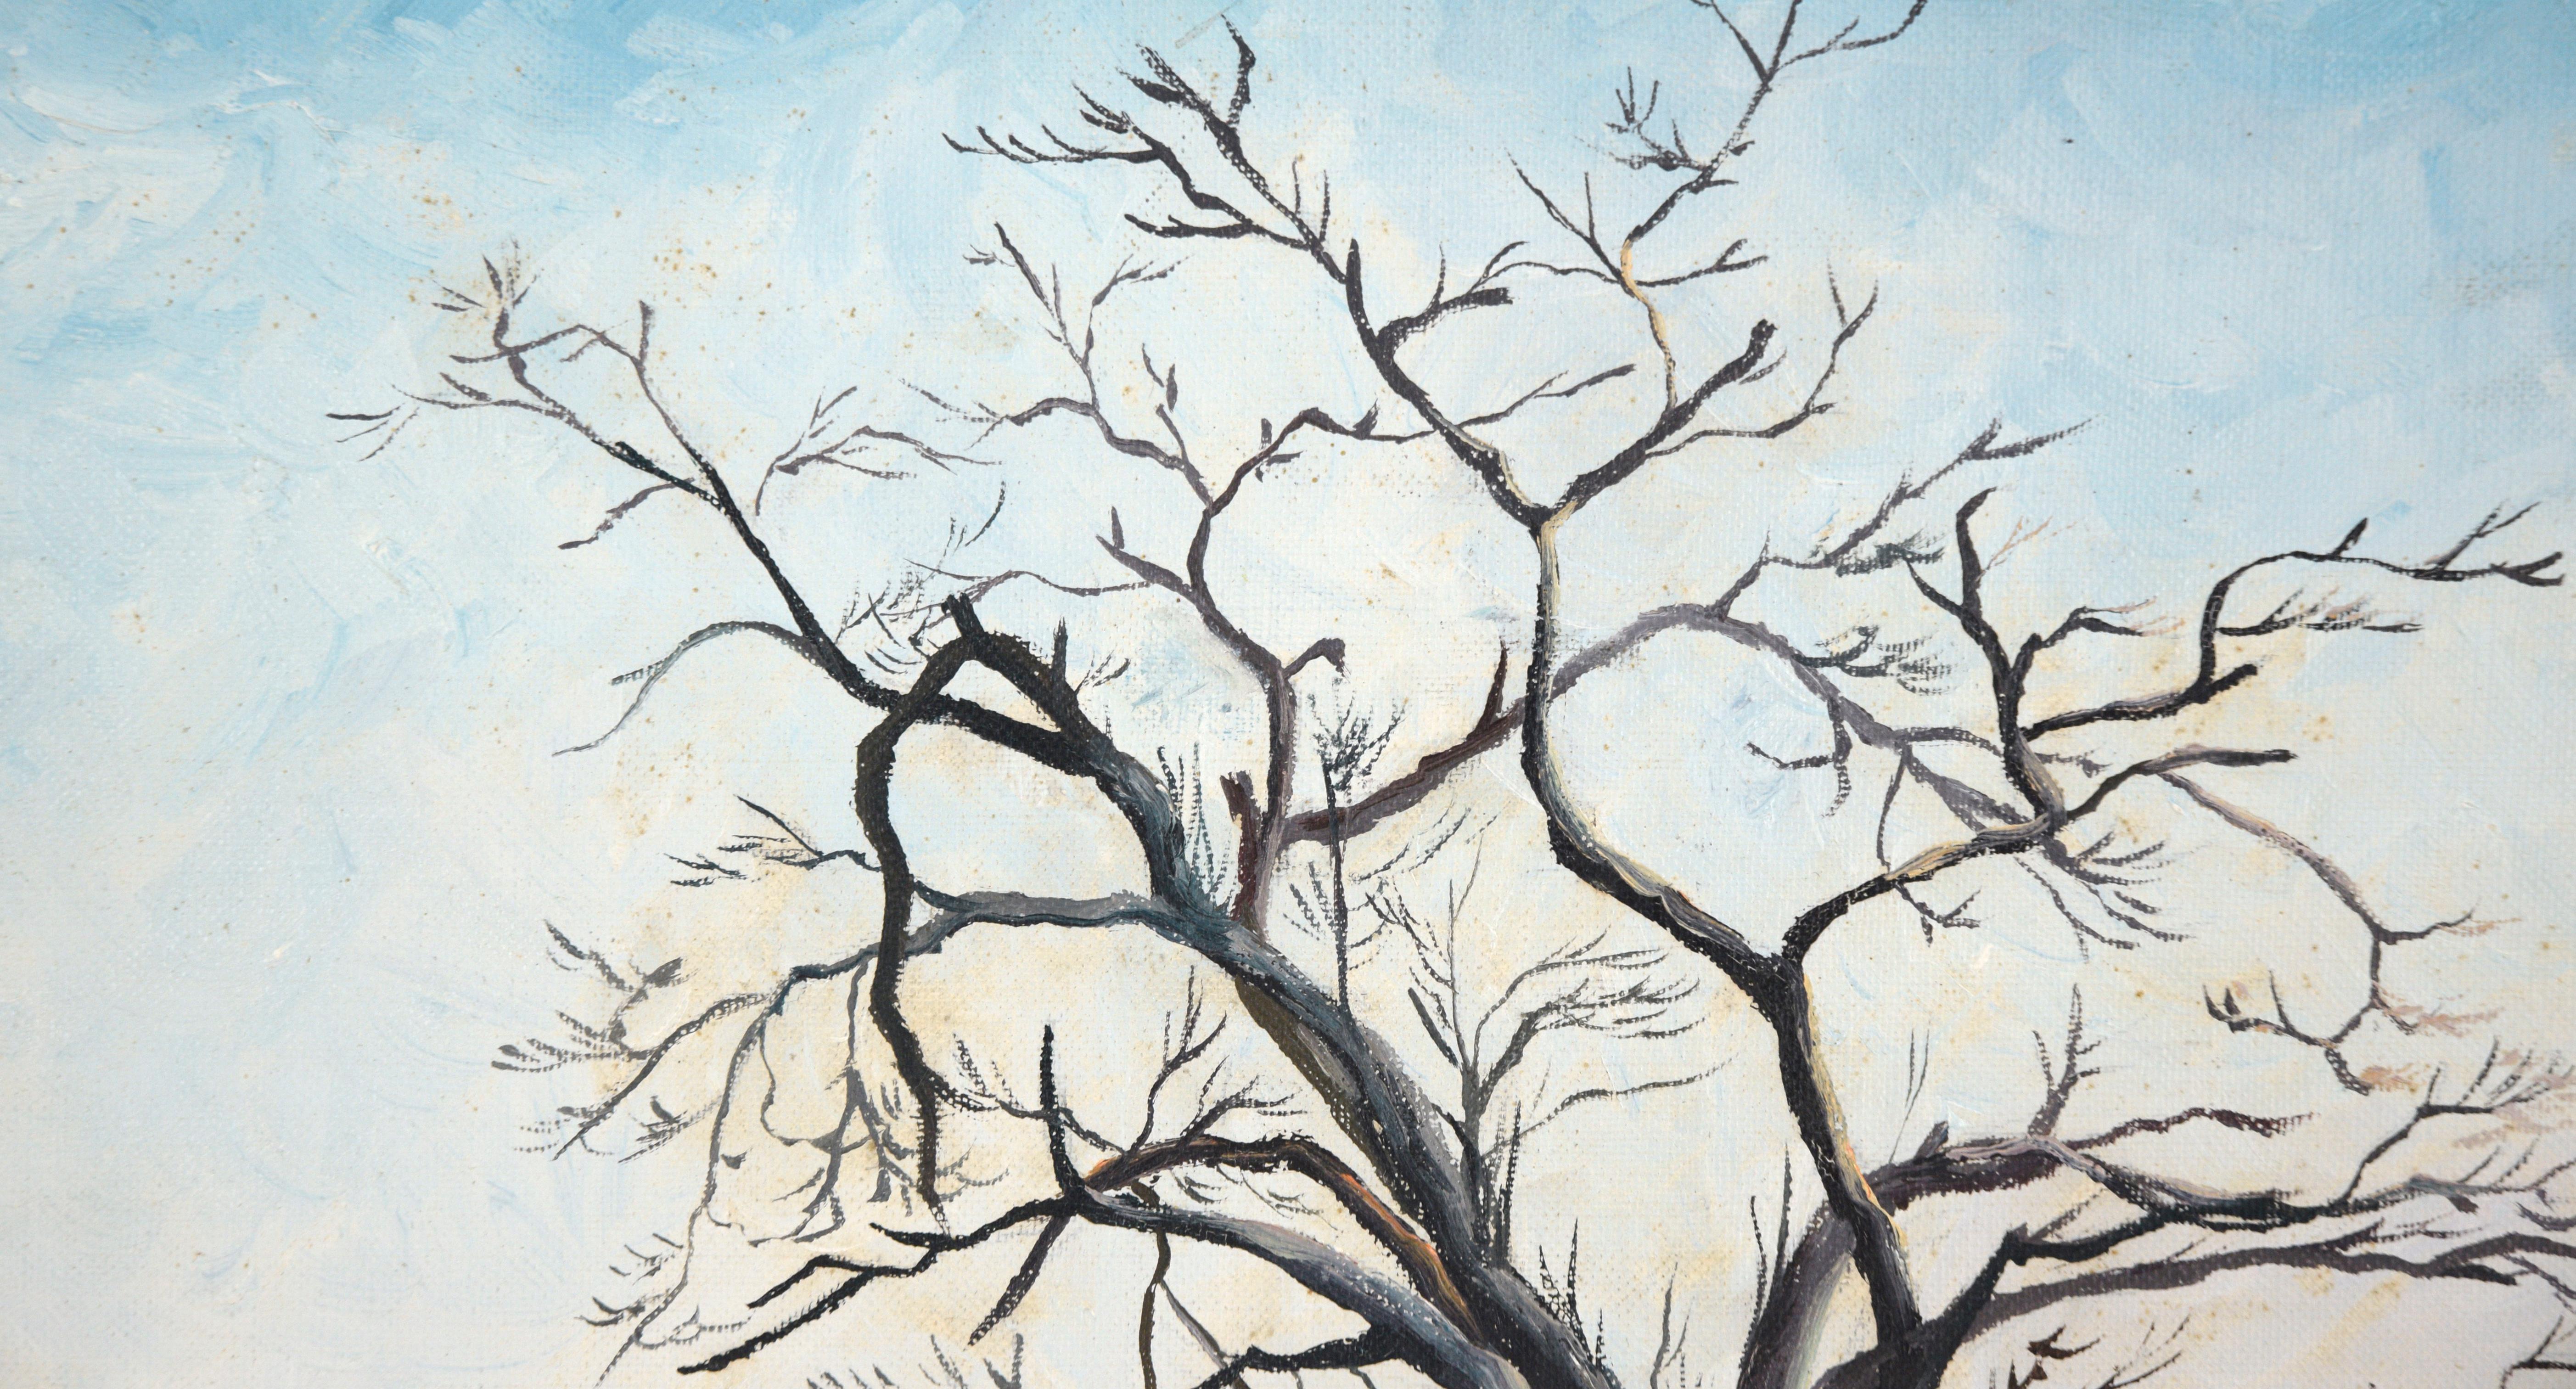 Bare Tree in the Field - Landscape - Painting by Tamiko Oberholtzer